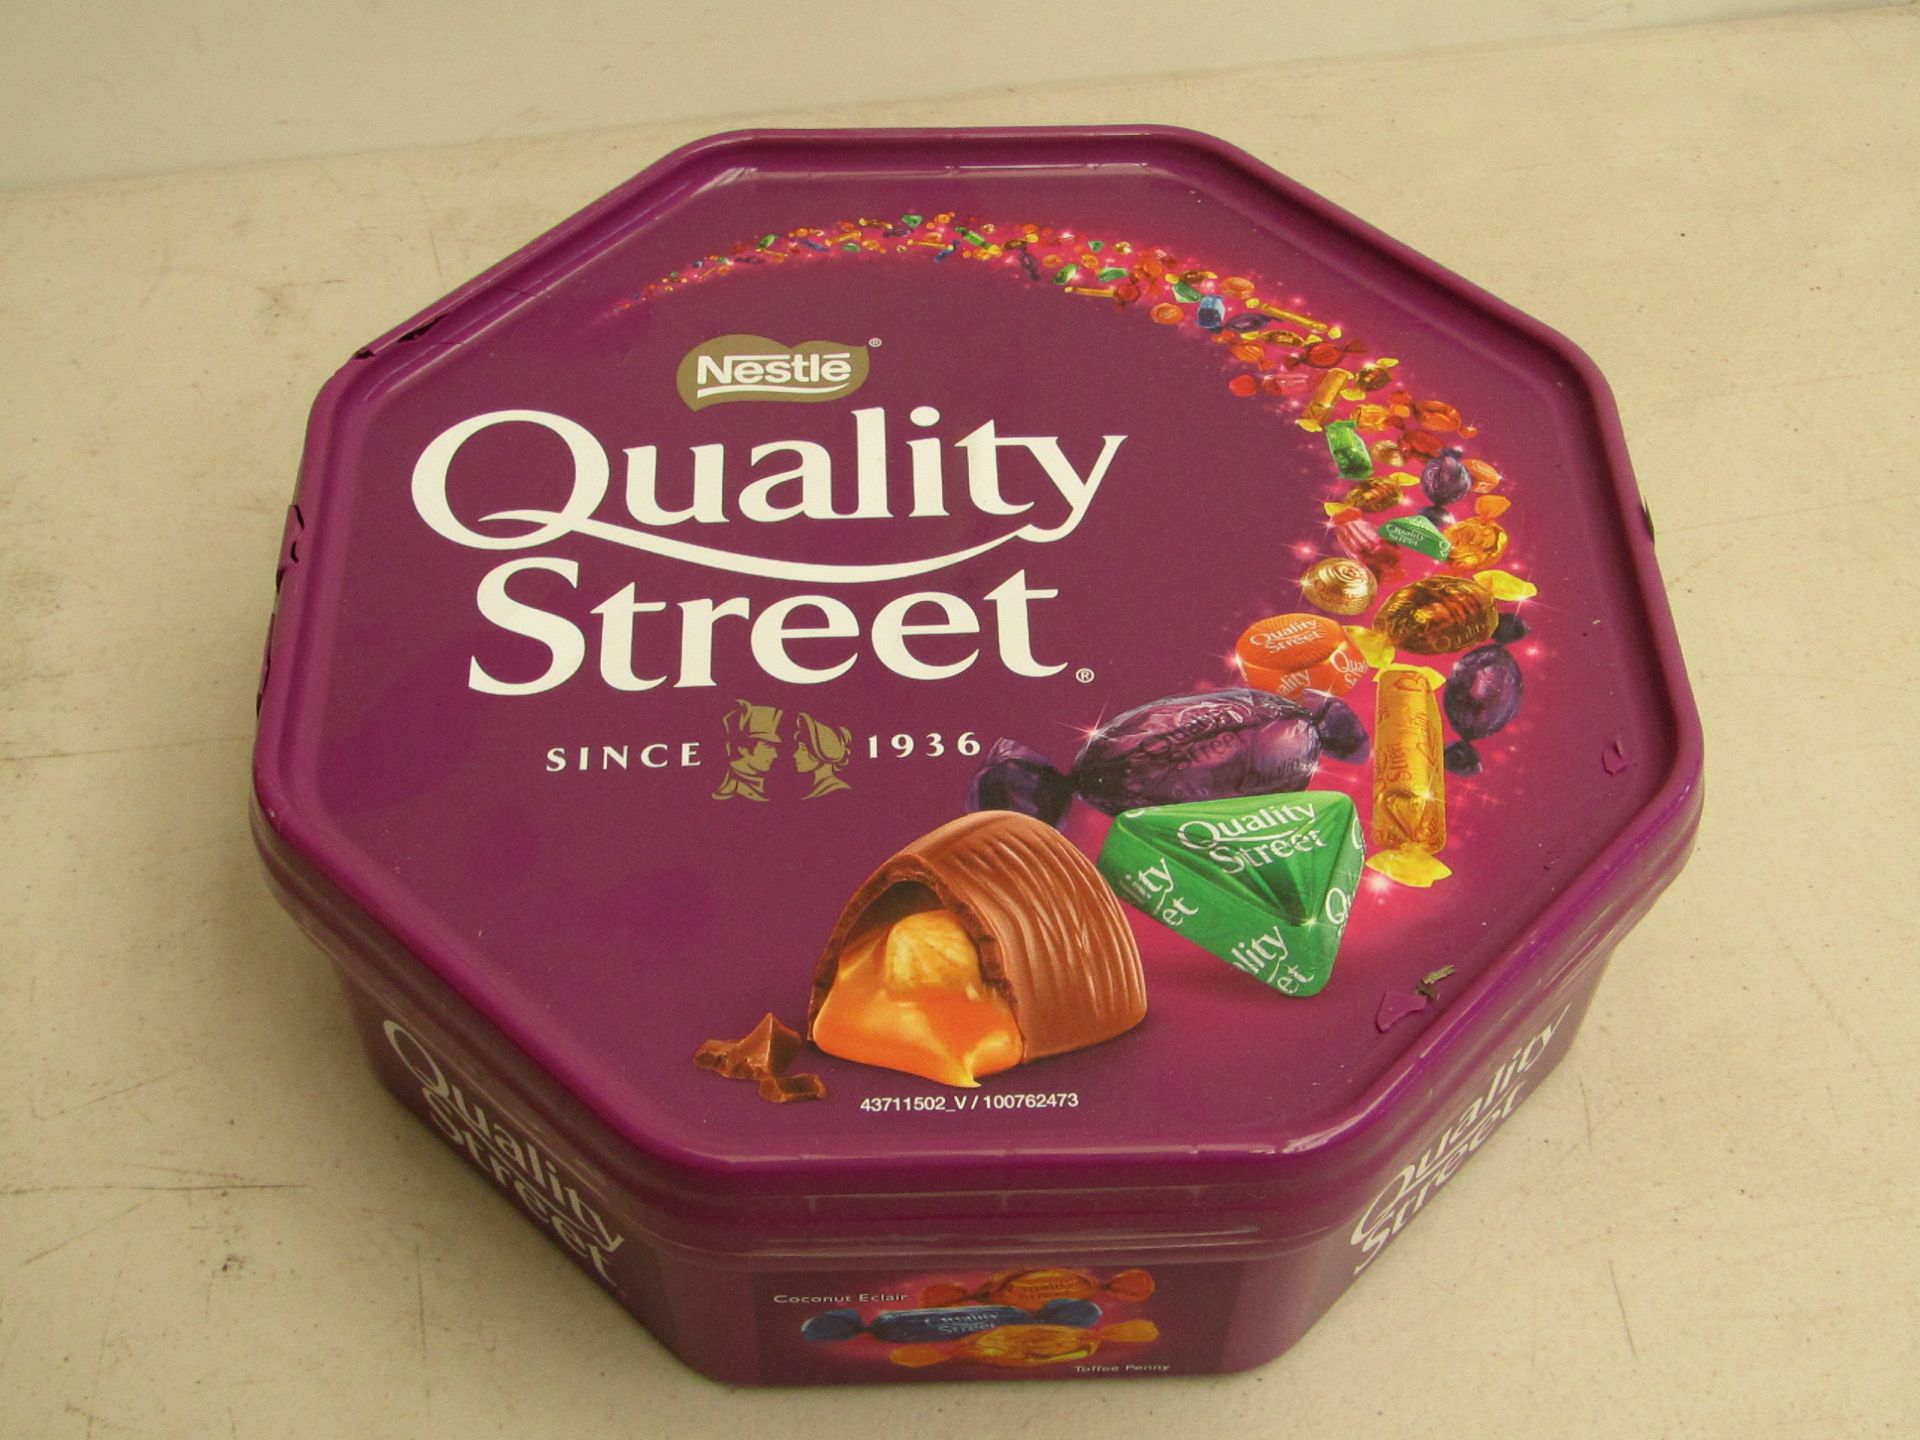 5x Boxes of Quality street 750g (3KG total), BB 04/2018. *Please note some of these boxes have